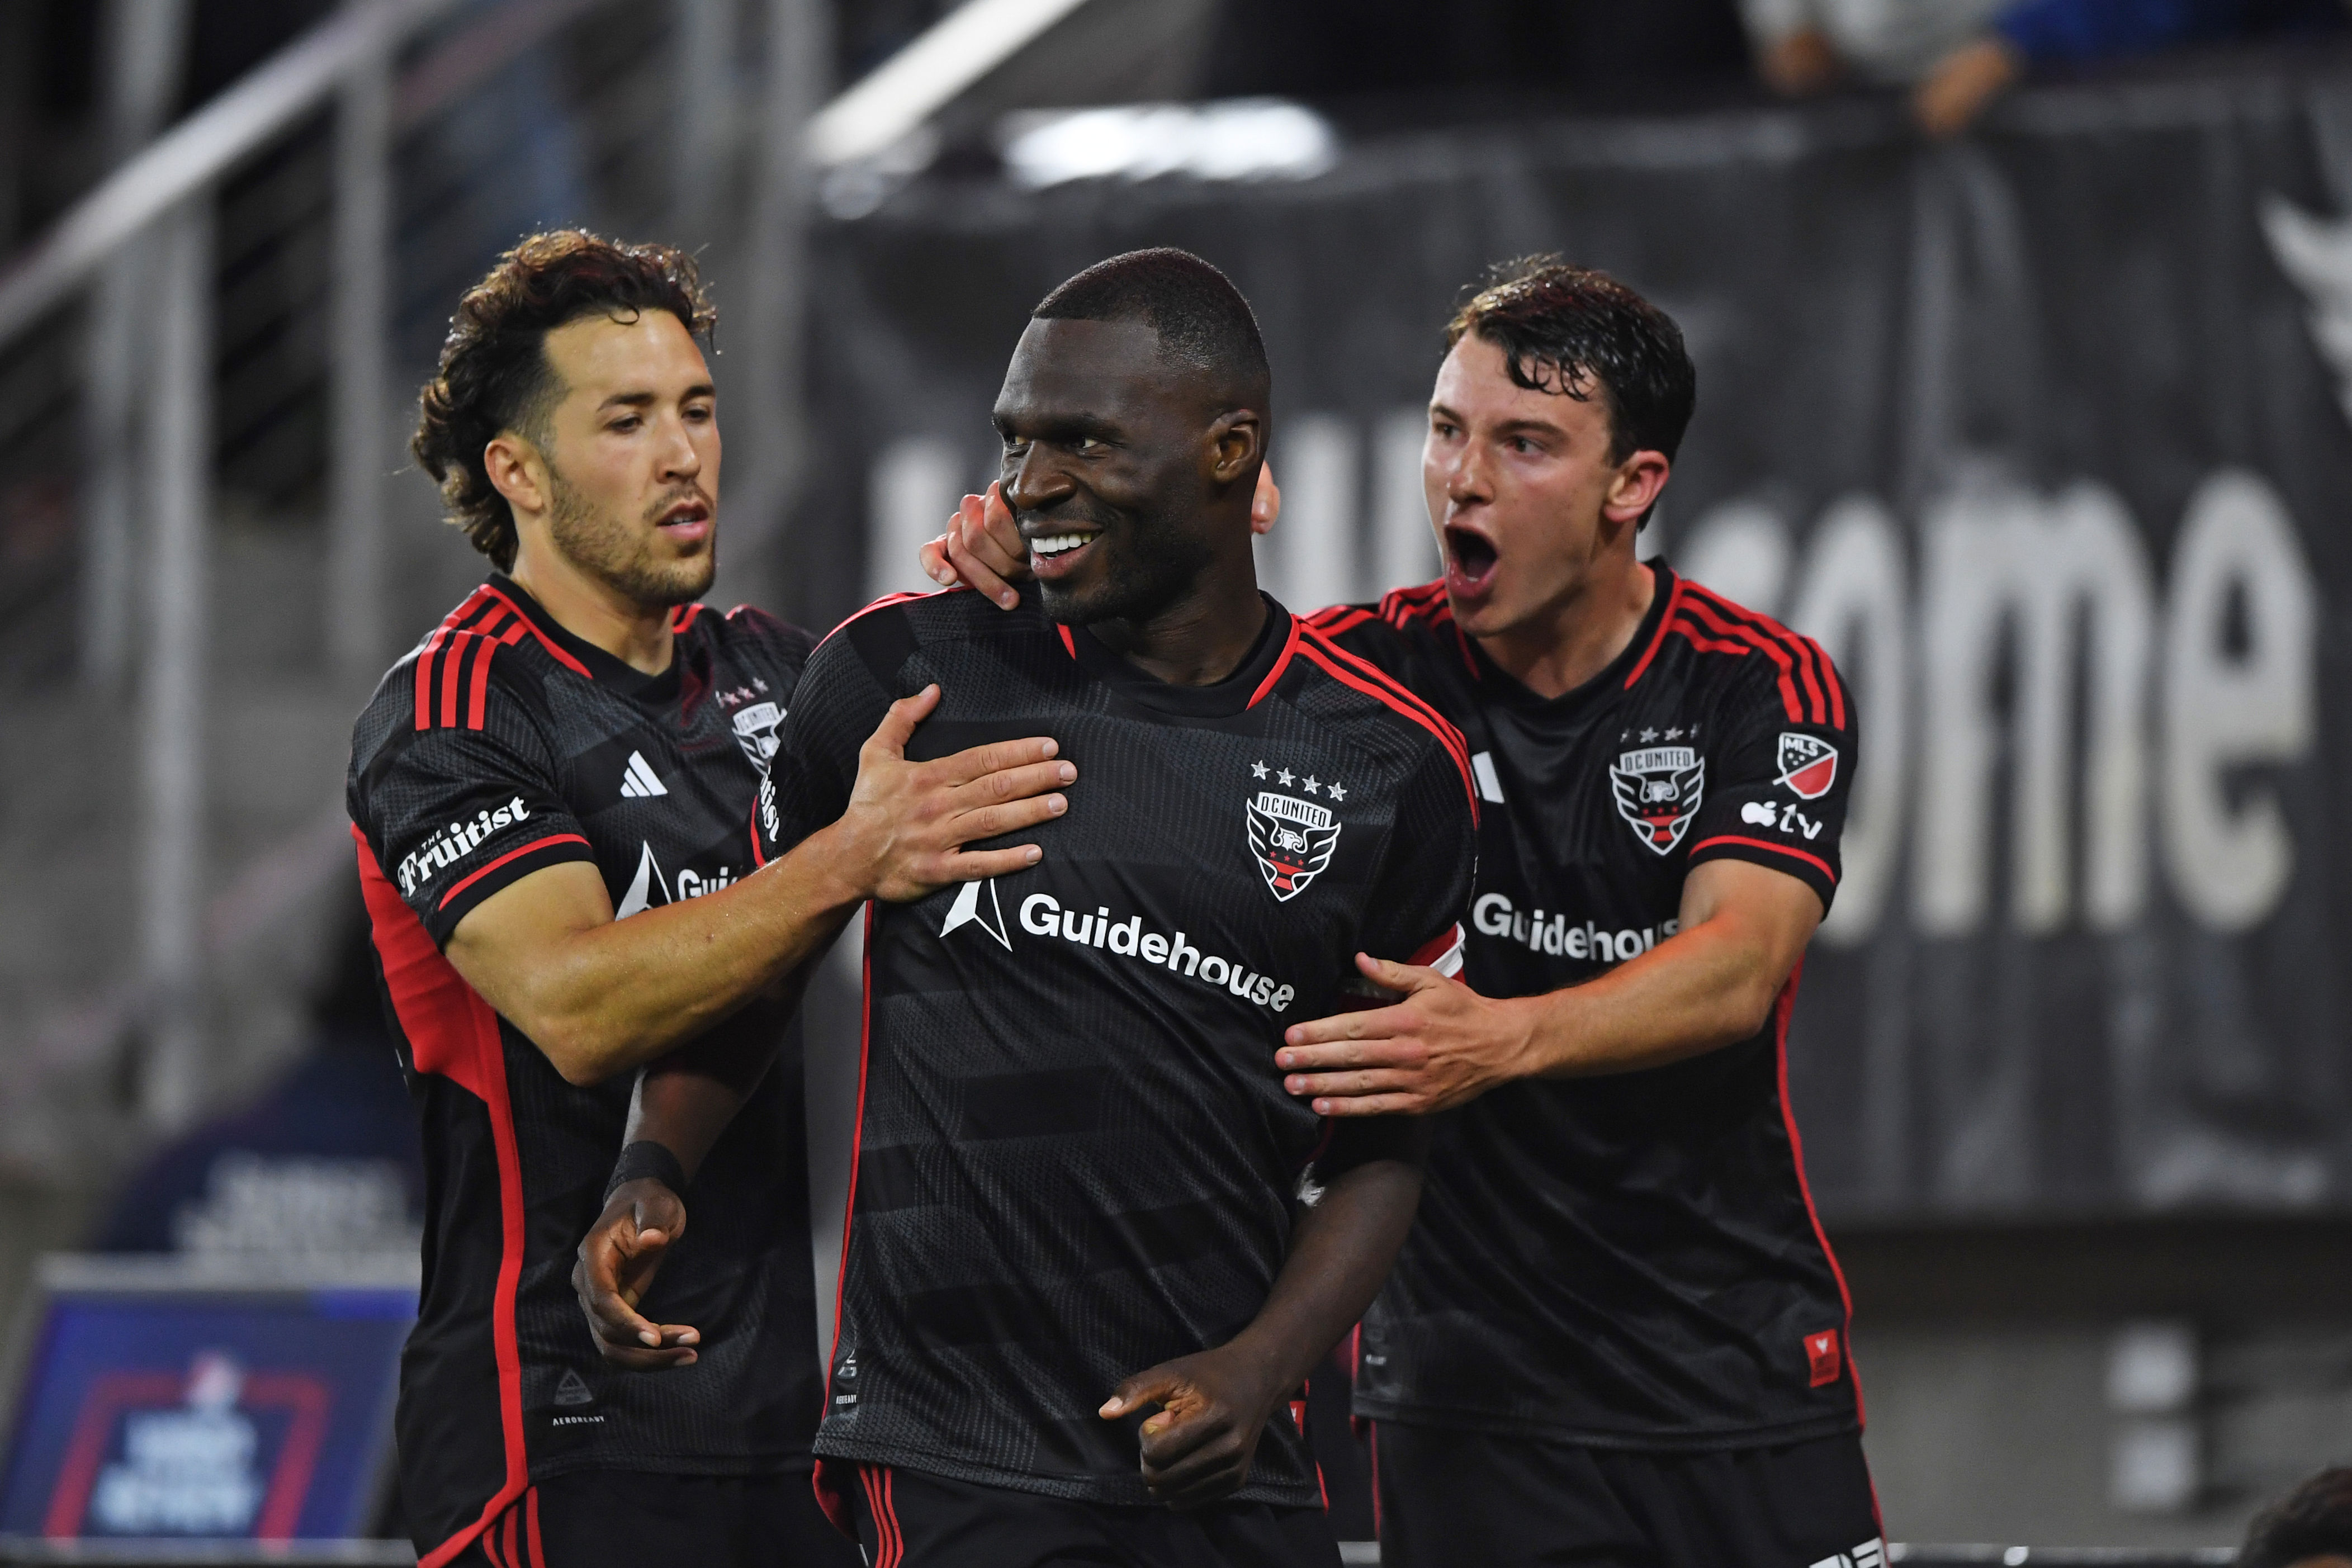 d.c. united holds on tight to hold off shorthanded sounders in 2-1 win